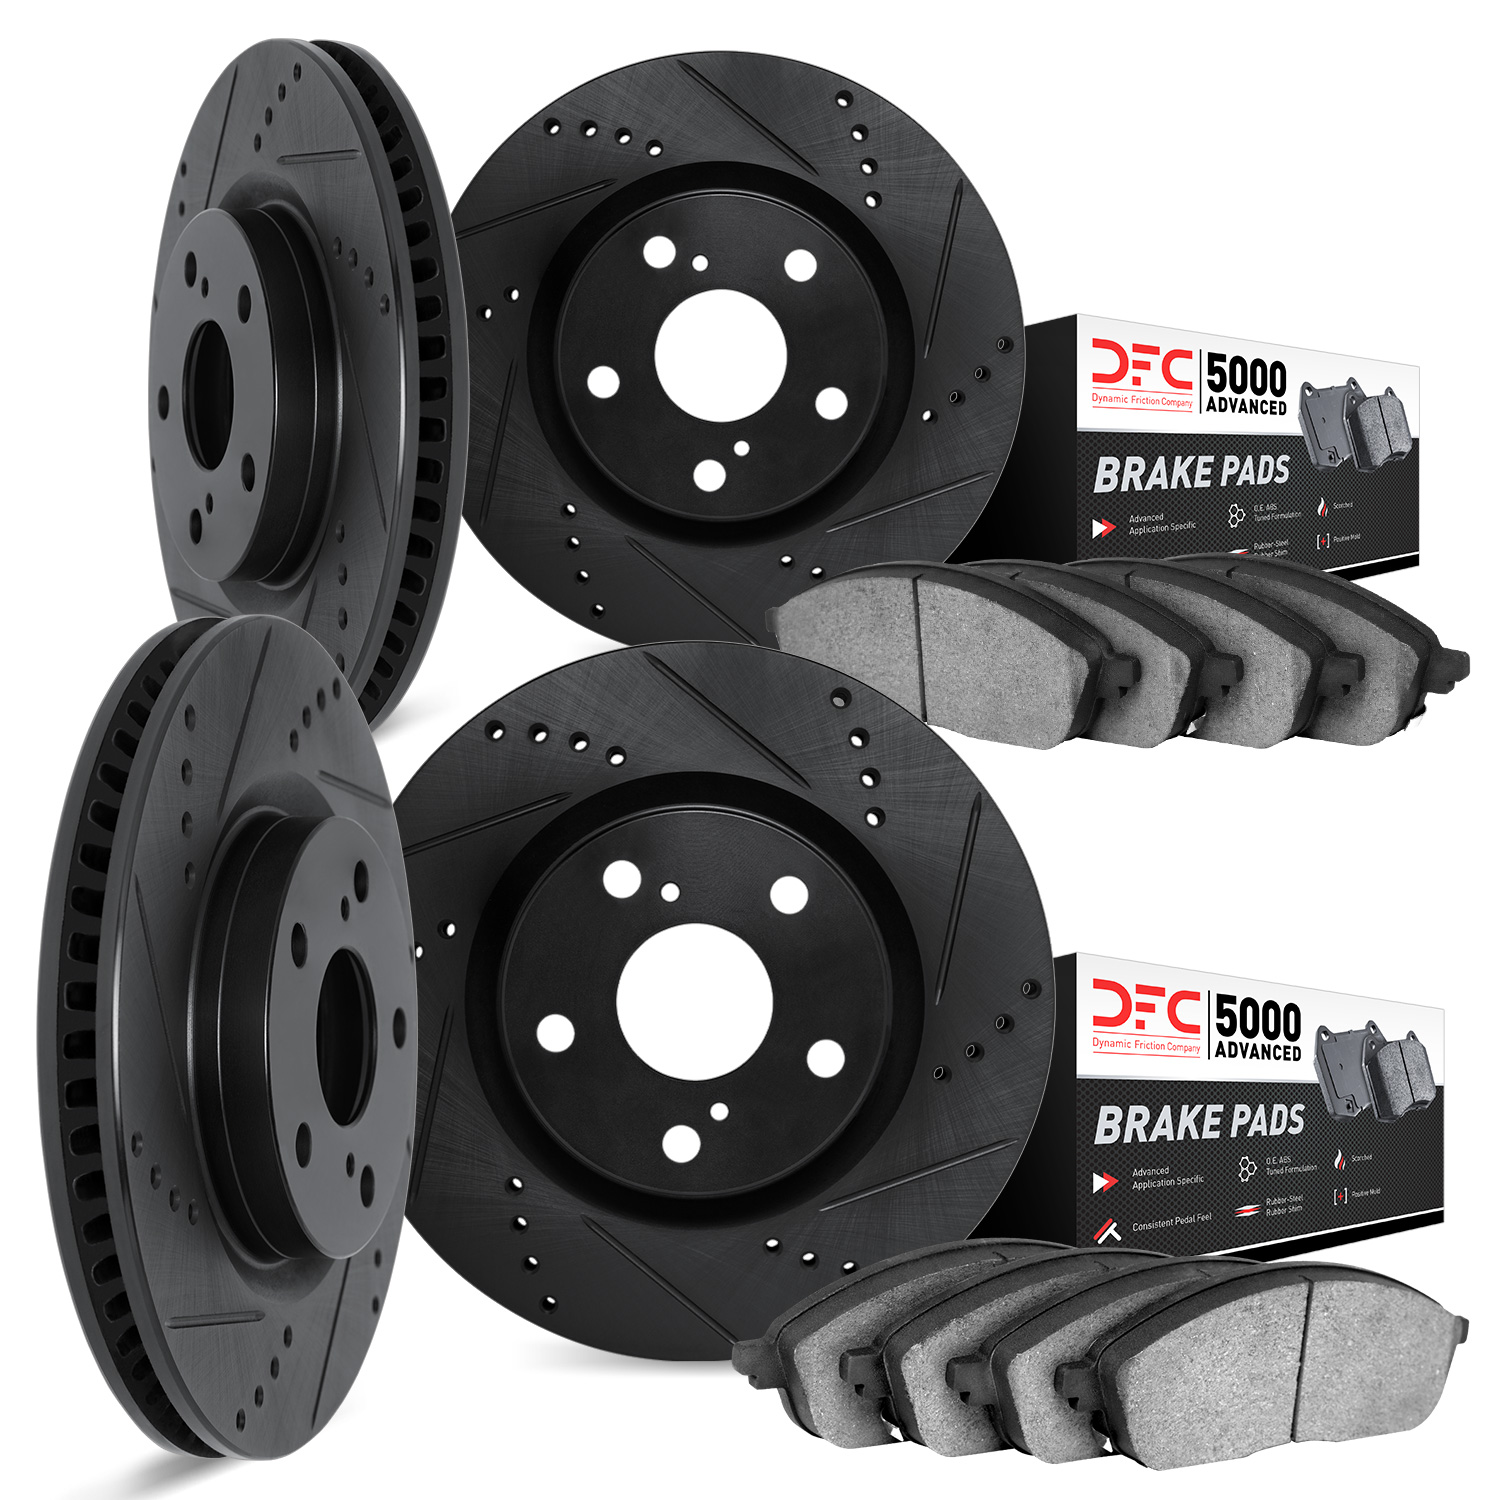 8504-13006 Drilled/Slotted Brake Rotors w/5000 Advanced Brake Pads Kit [Black], 2003-2004 Subaru, Position: Front and Rear